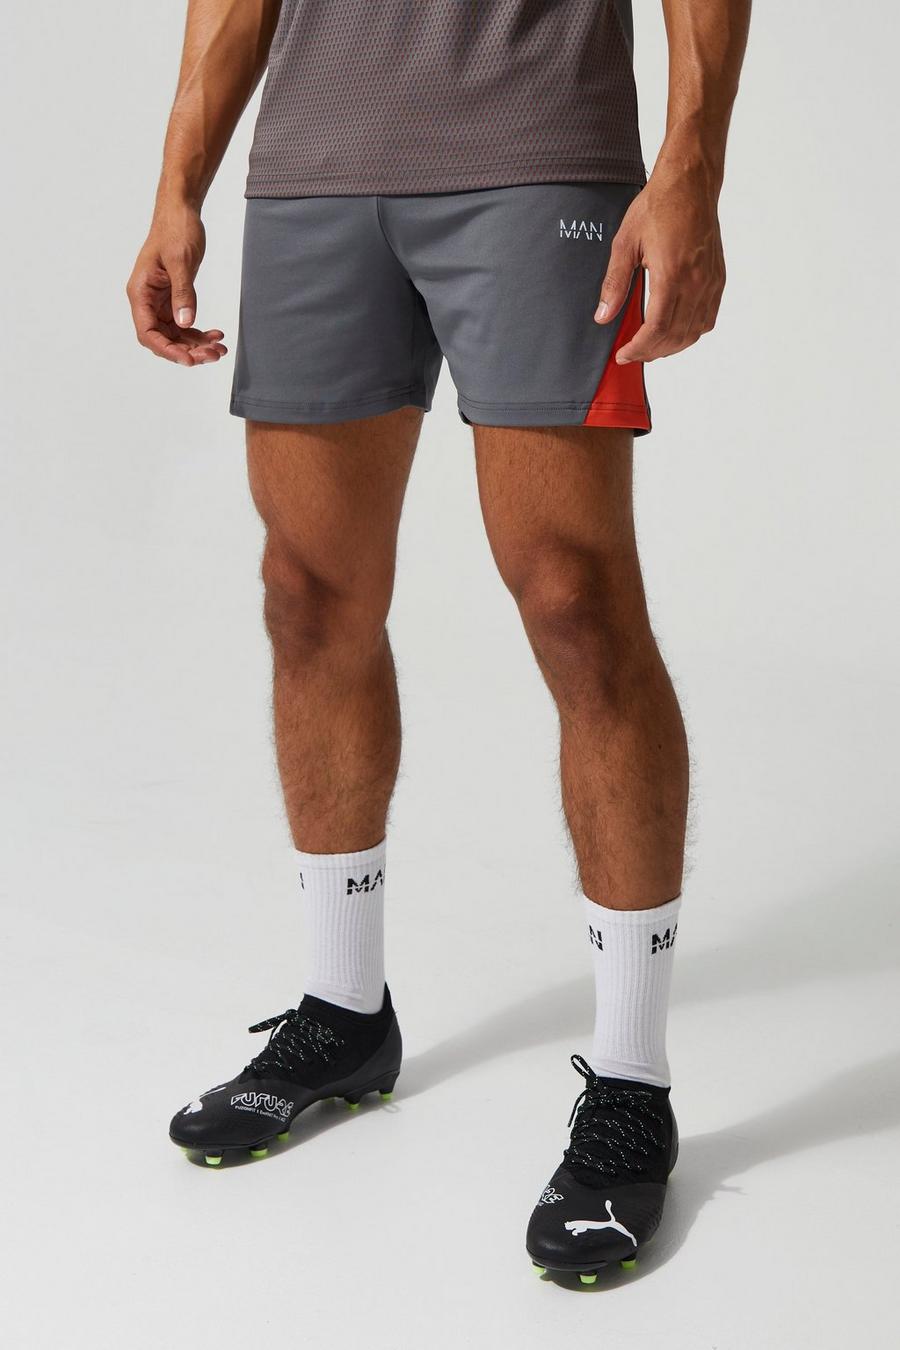 Man Active Trainings Performance Shorts, Charcoal gris